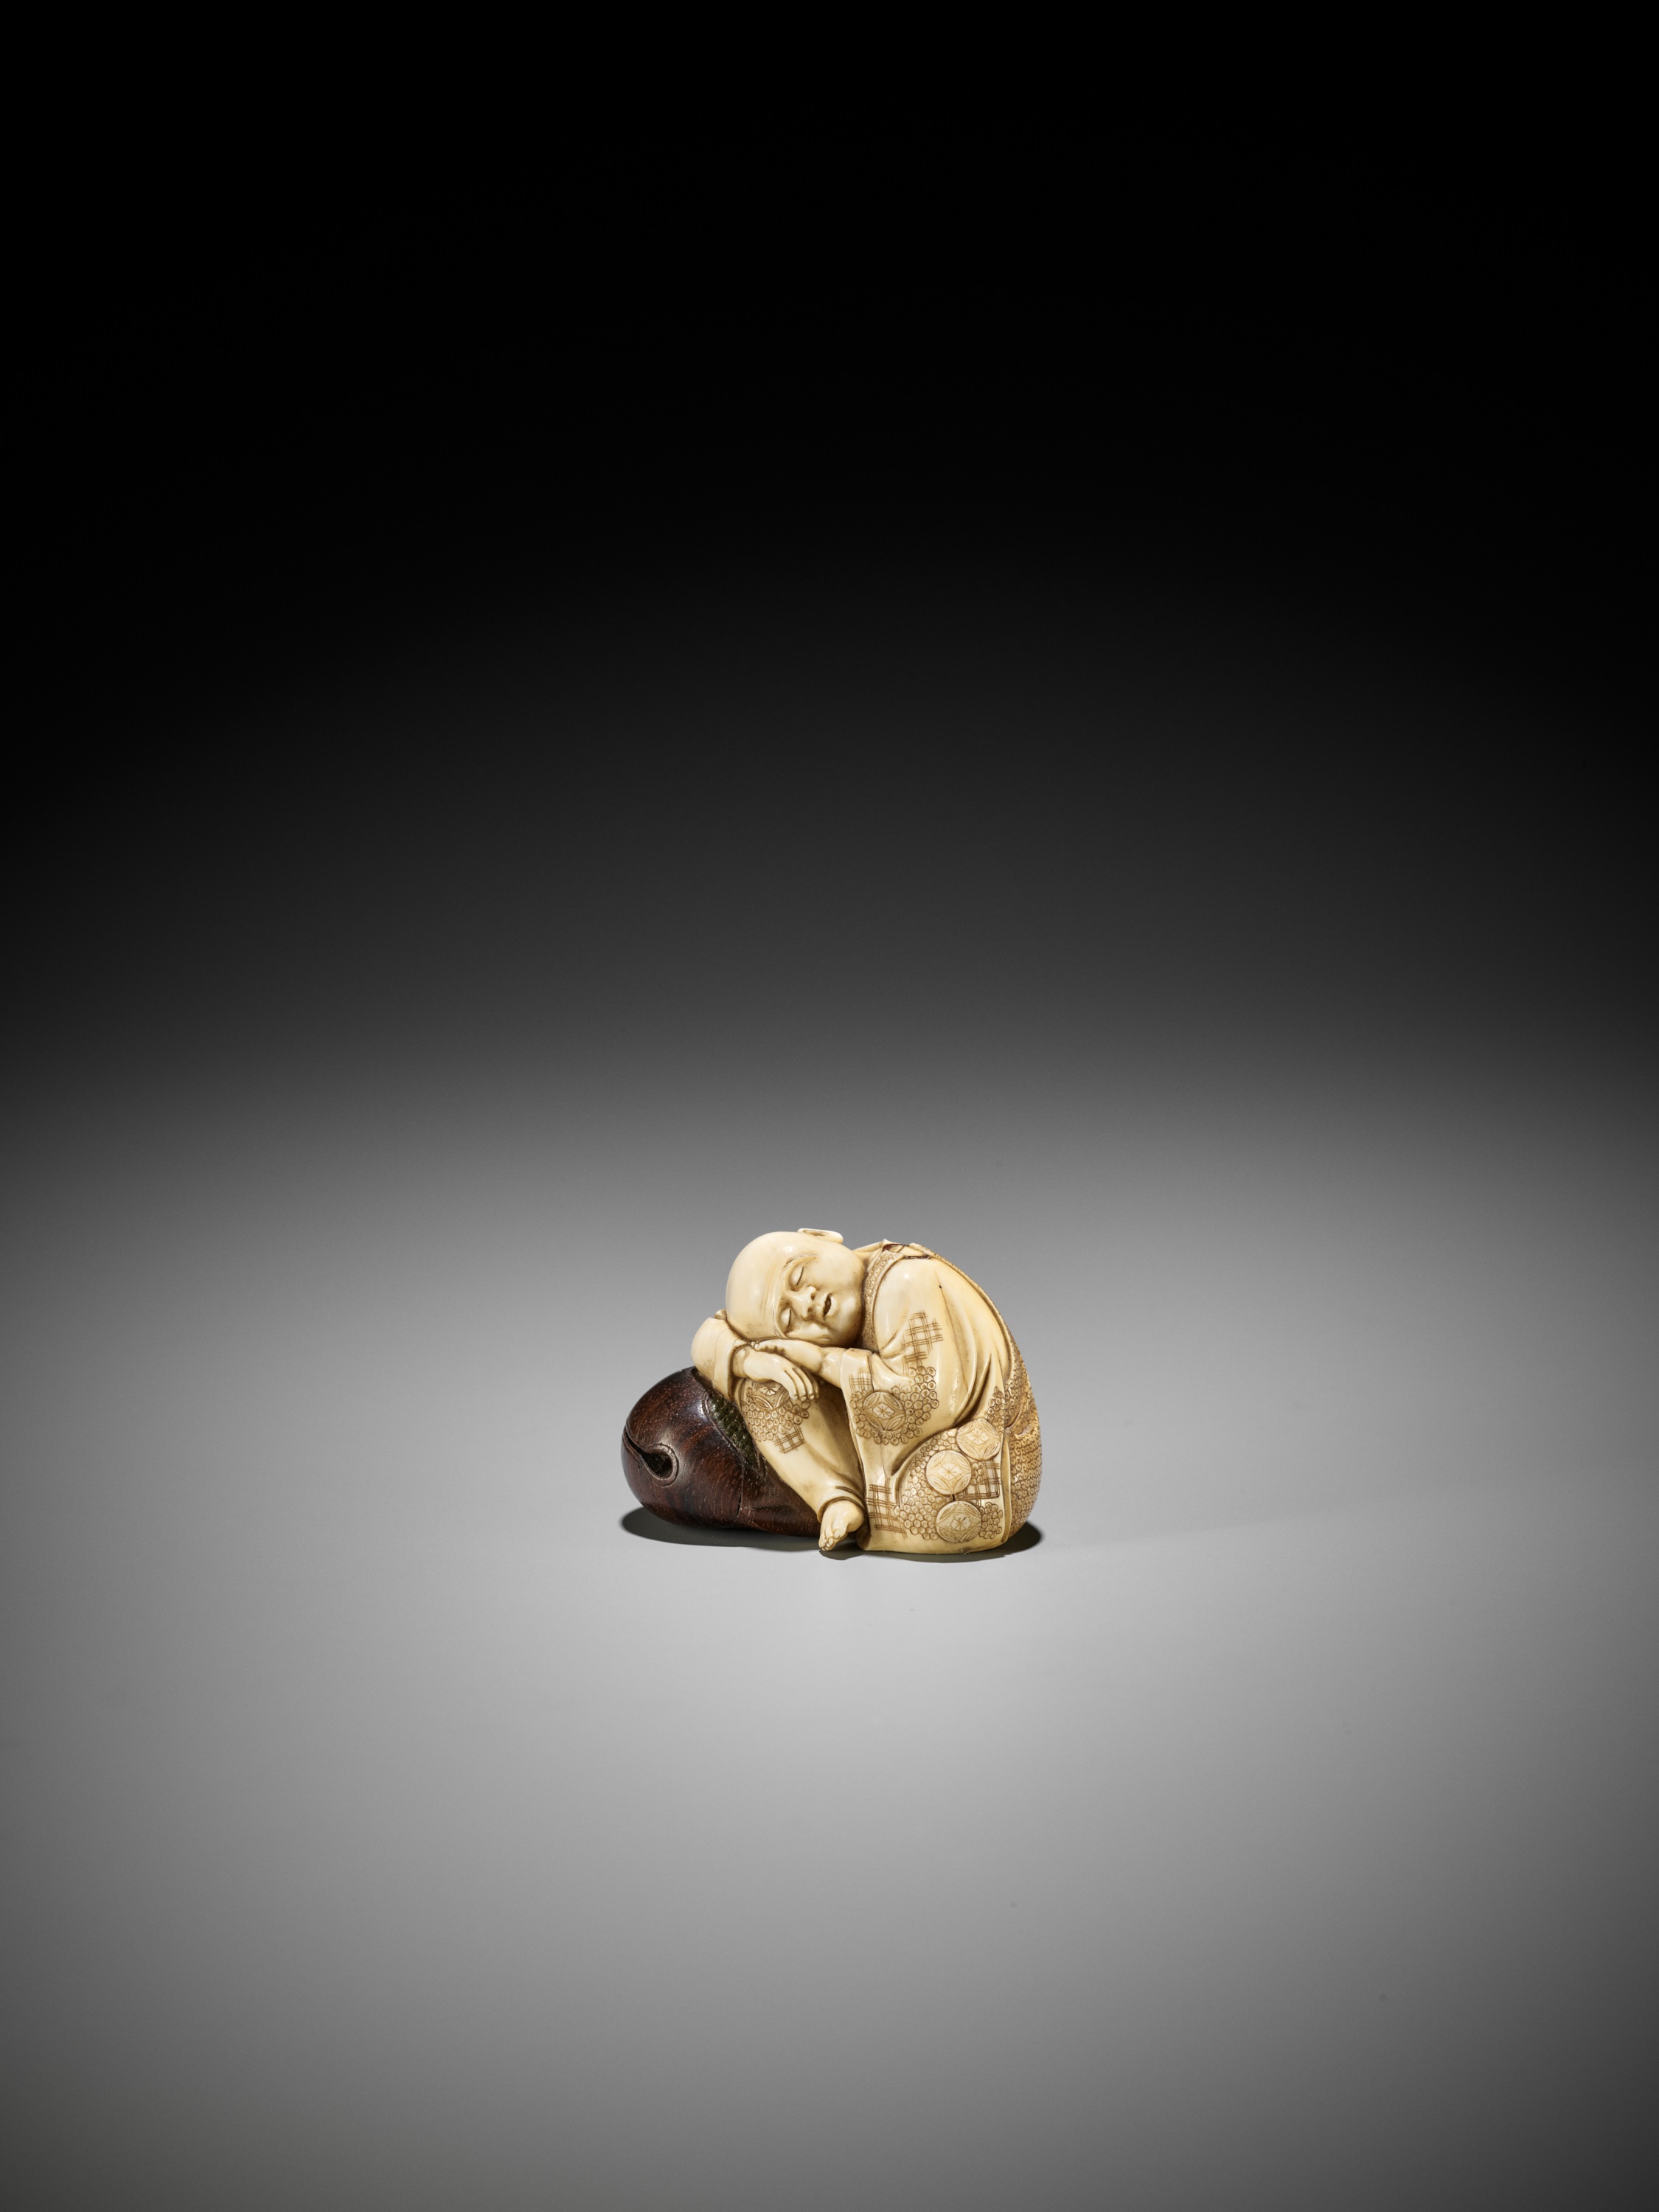 GYOKUSUI: A FINE TOKYO SCHOOL IVORY AND WOOD NETSUKE OF A PRIEST RESTING ON A MOKUGYO - Image 3 of 11